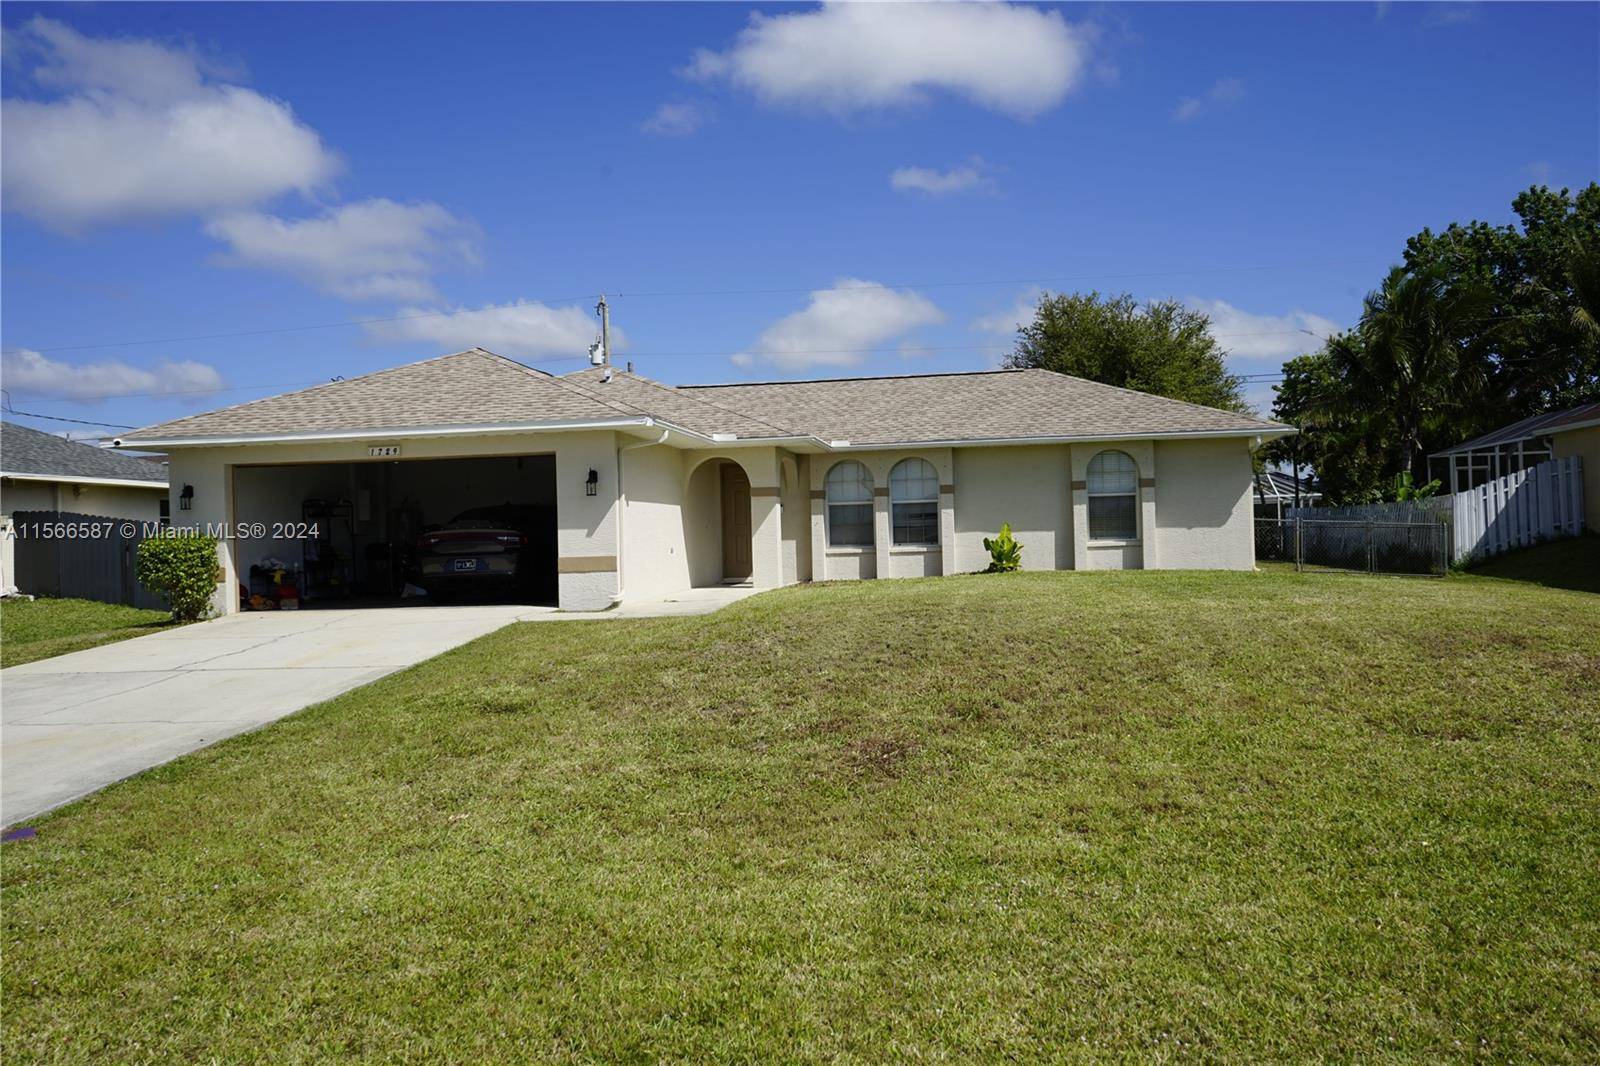 This lovely home includes 3 bedrooms, 2 bathrooms, a screened lanai, a 2 car garage with an electric gate, an open kitchen, dining, and living area.